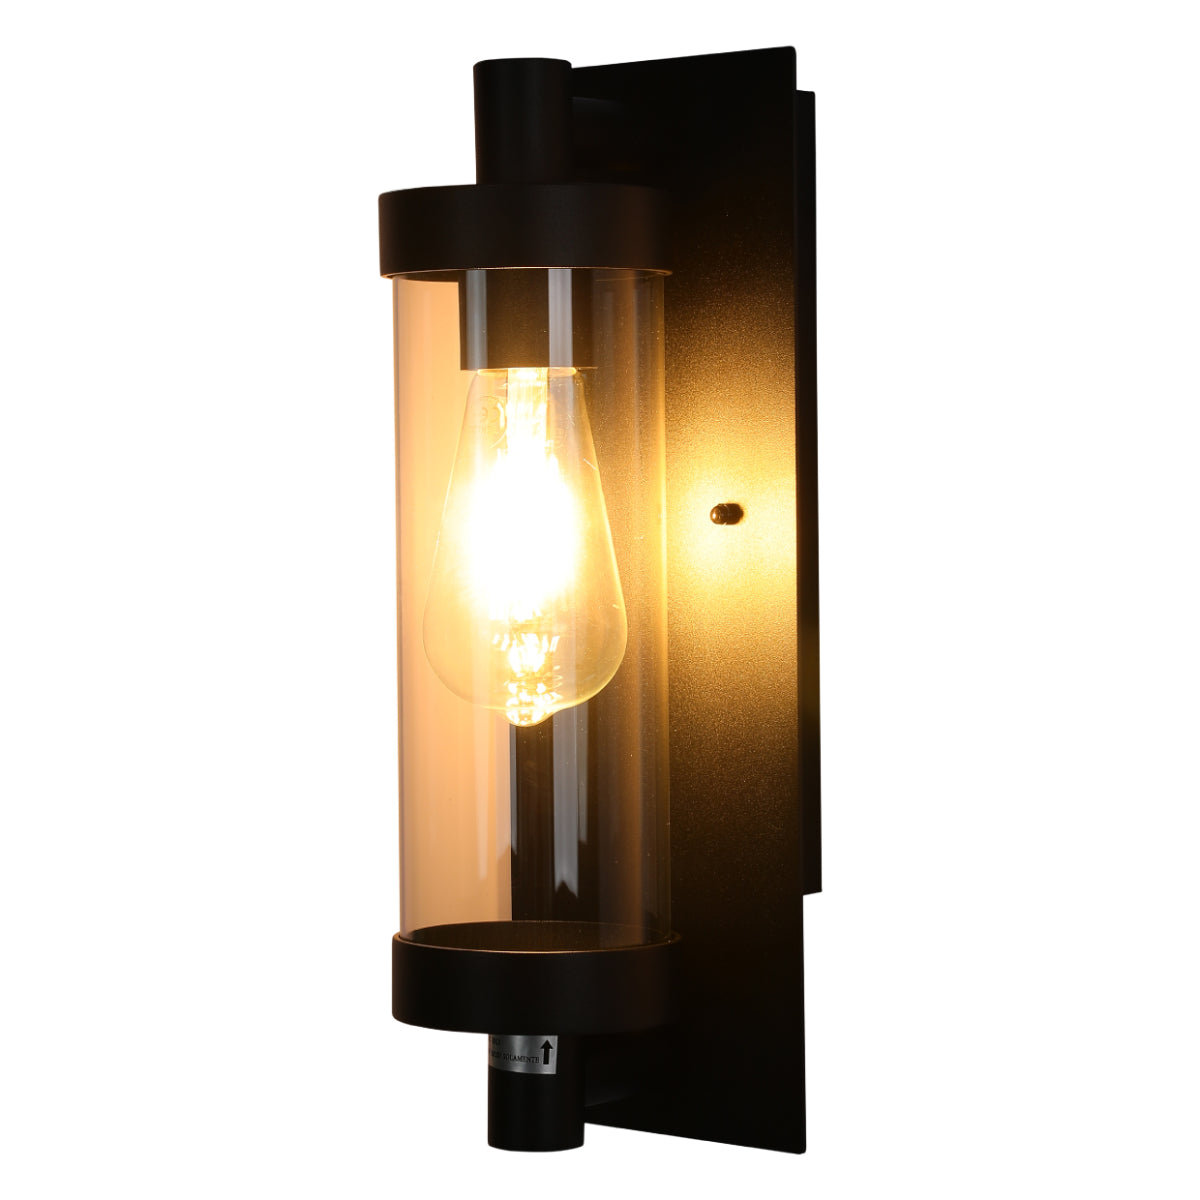 Main image of Timeless Elegance Wall Sconce - Durable Glass & Aluminum